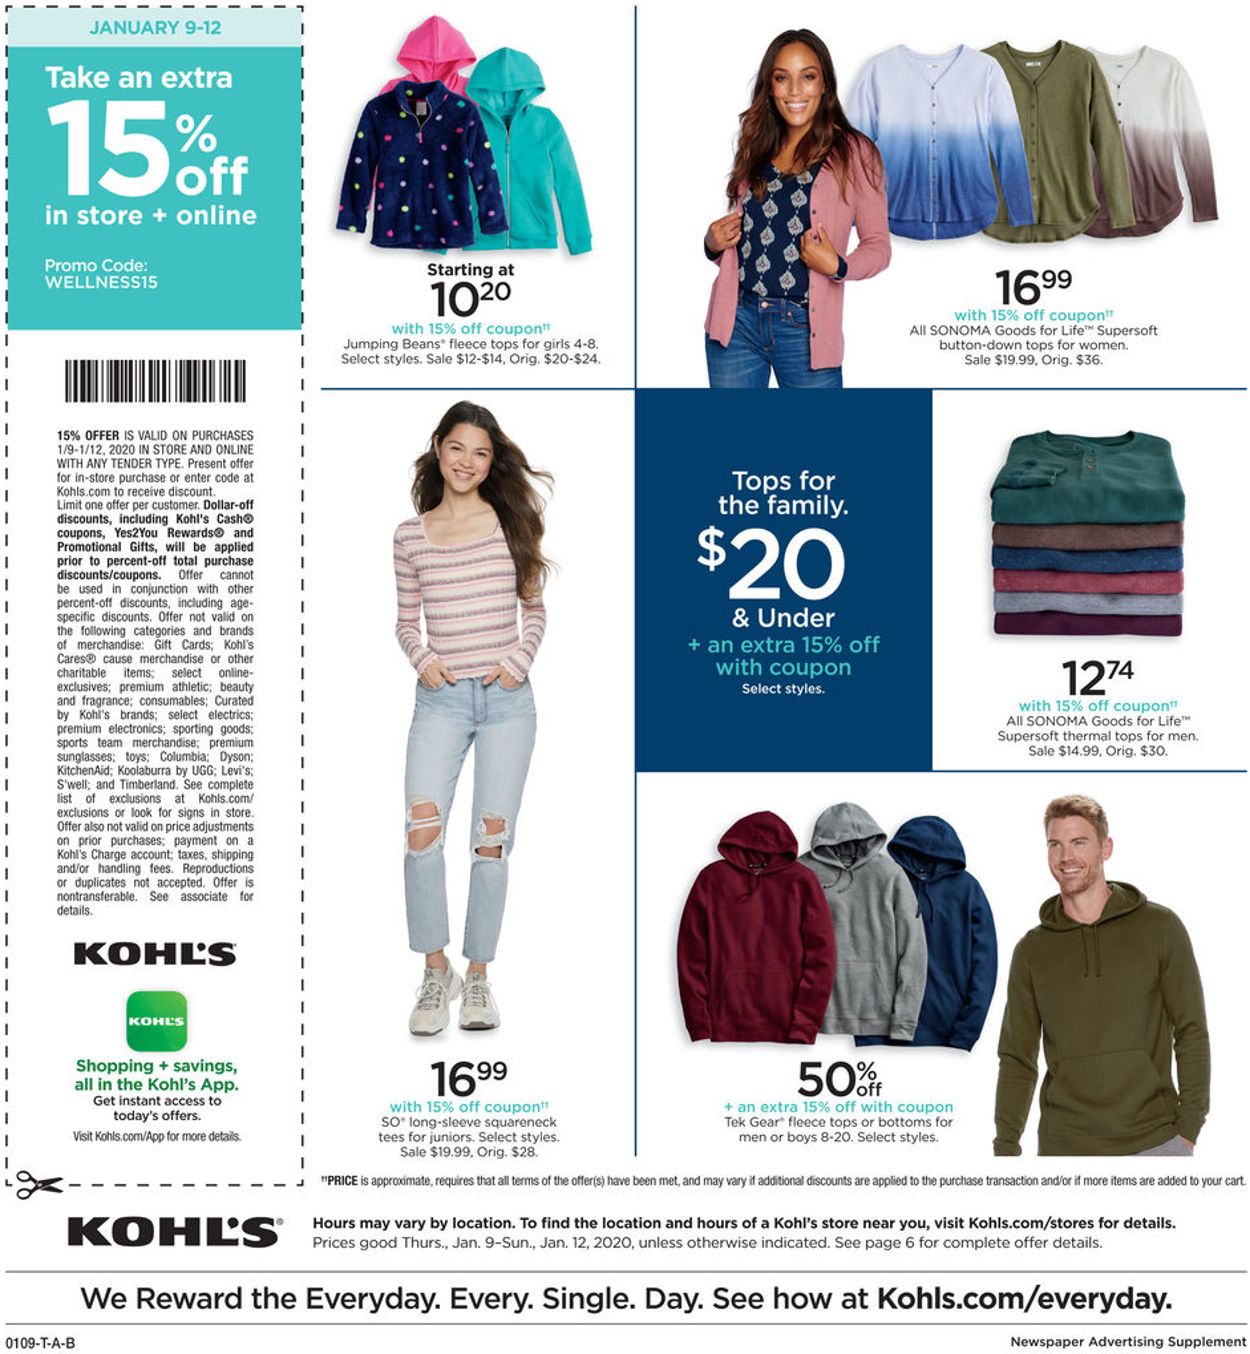 Kohl's Current weekly ad 01/09 - 01/12/2020 [8] - frequent-ads.com